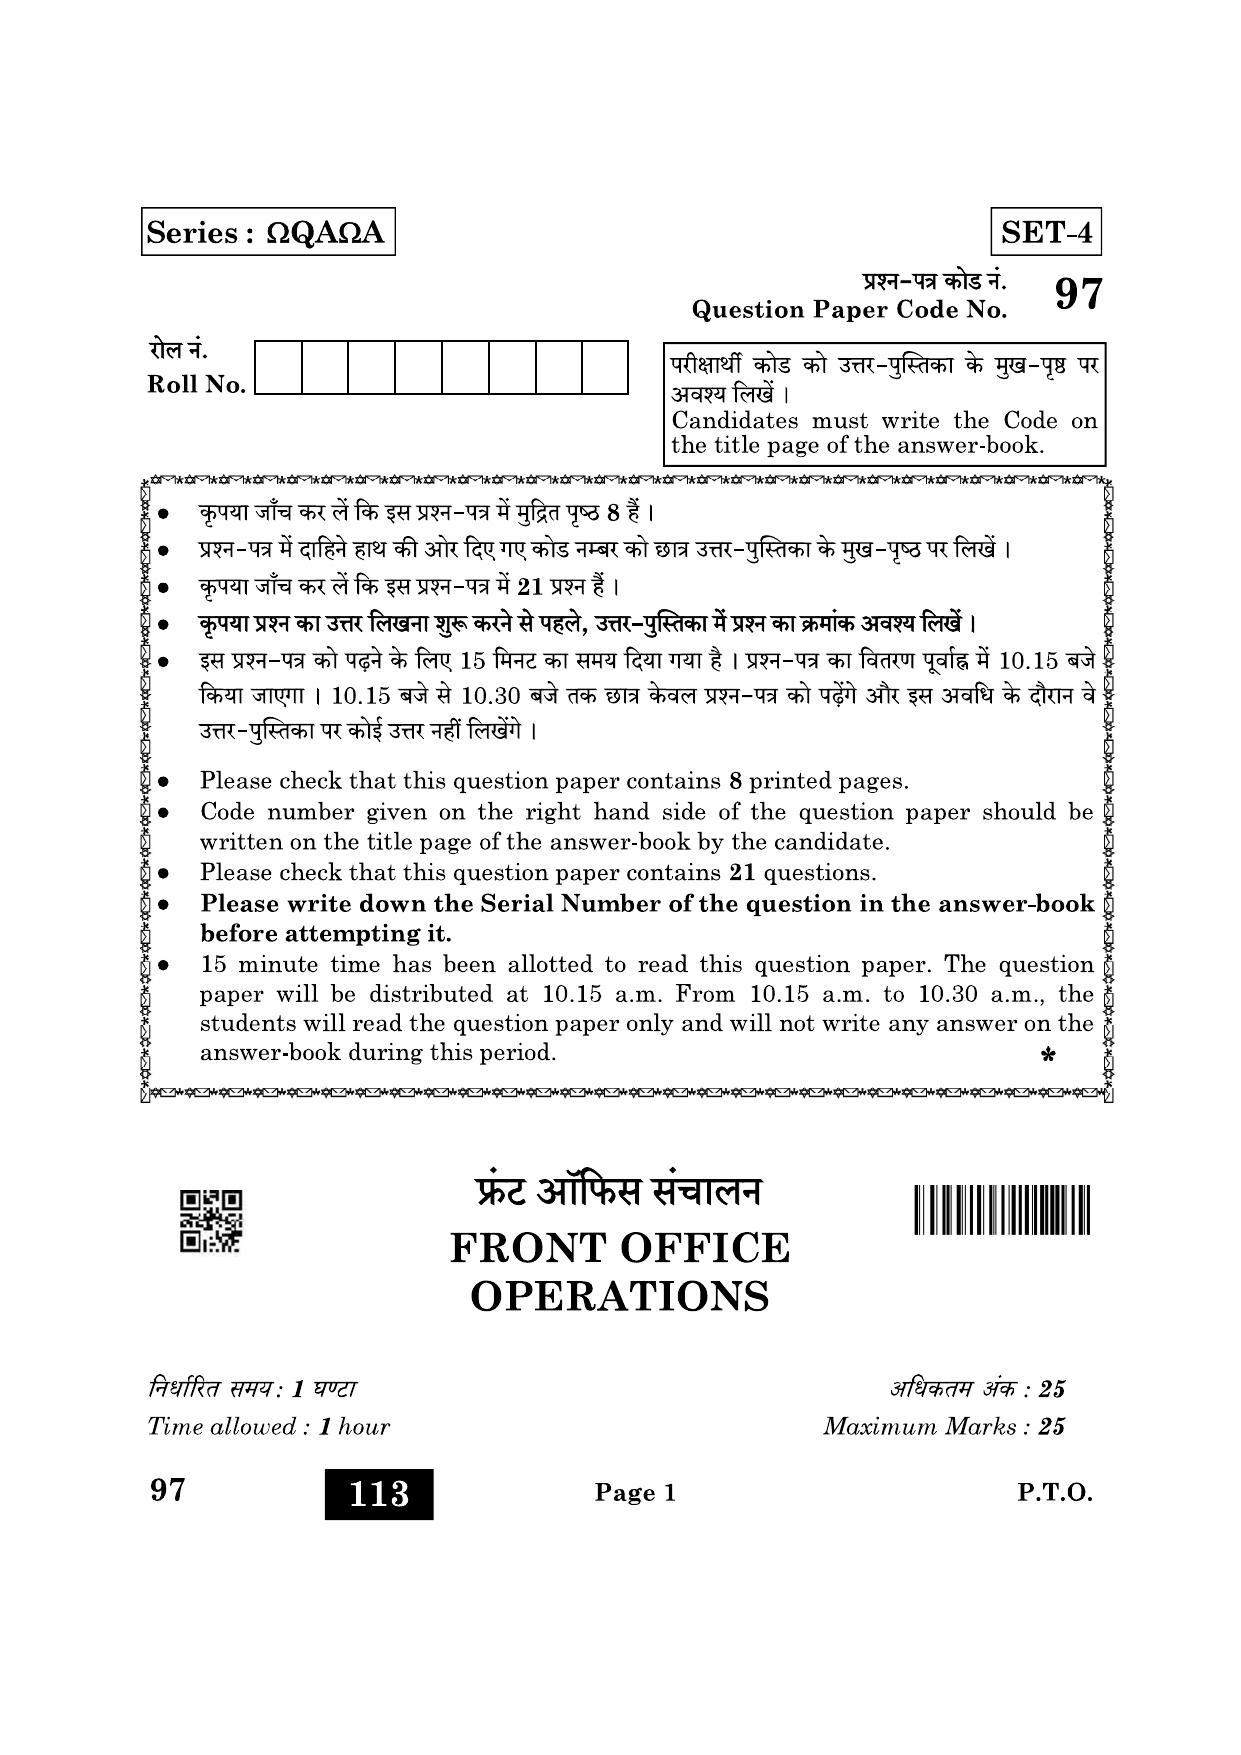 CBSE Class 10 97 Front Office Operations 2022 Question Paper - Page 1